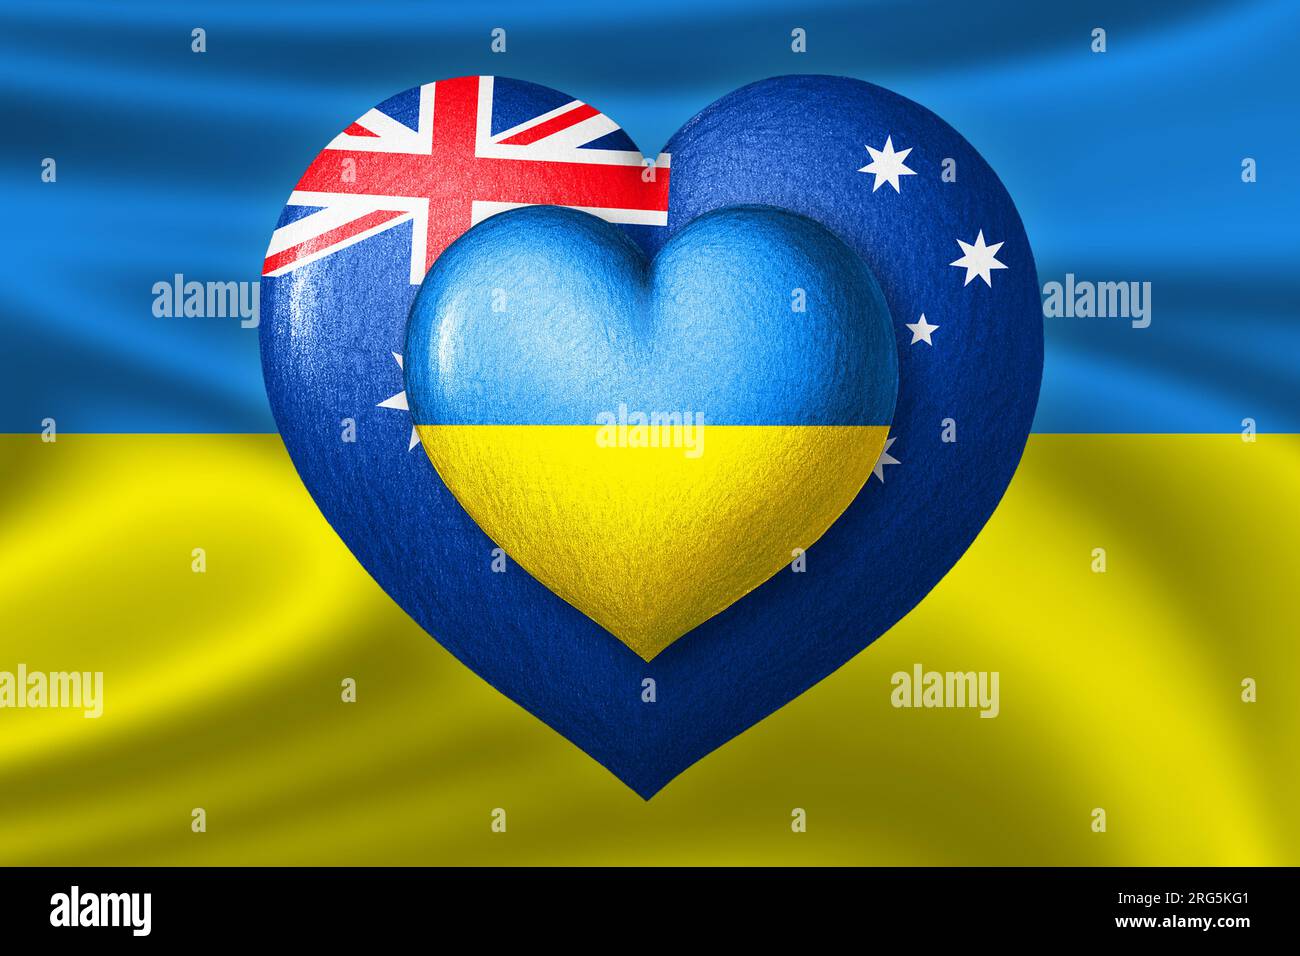 Flags of Ukraine and Australia. Two hearts in the colors of the flags on the background of the flag of Ukraine. Protection, solidarity and help concep Stock Photo